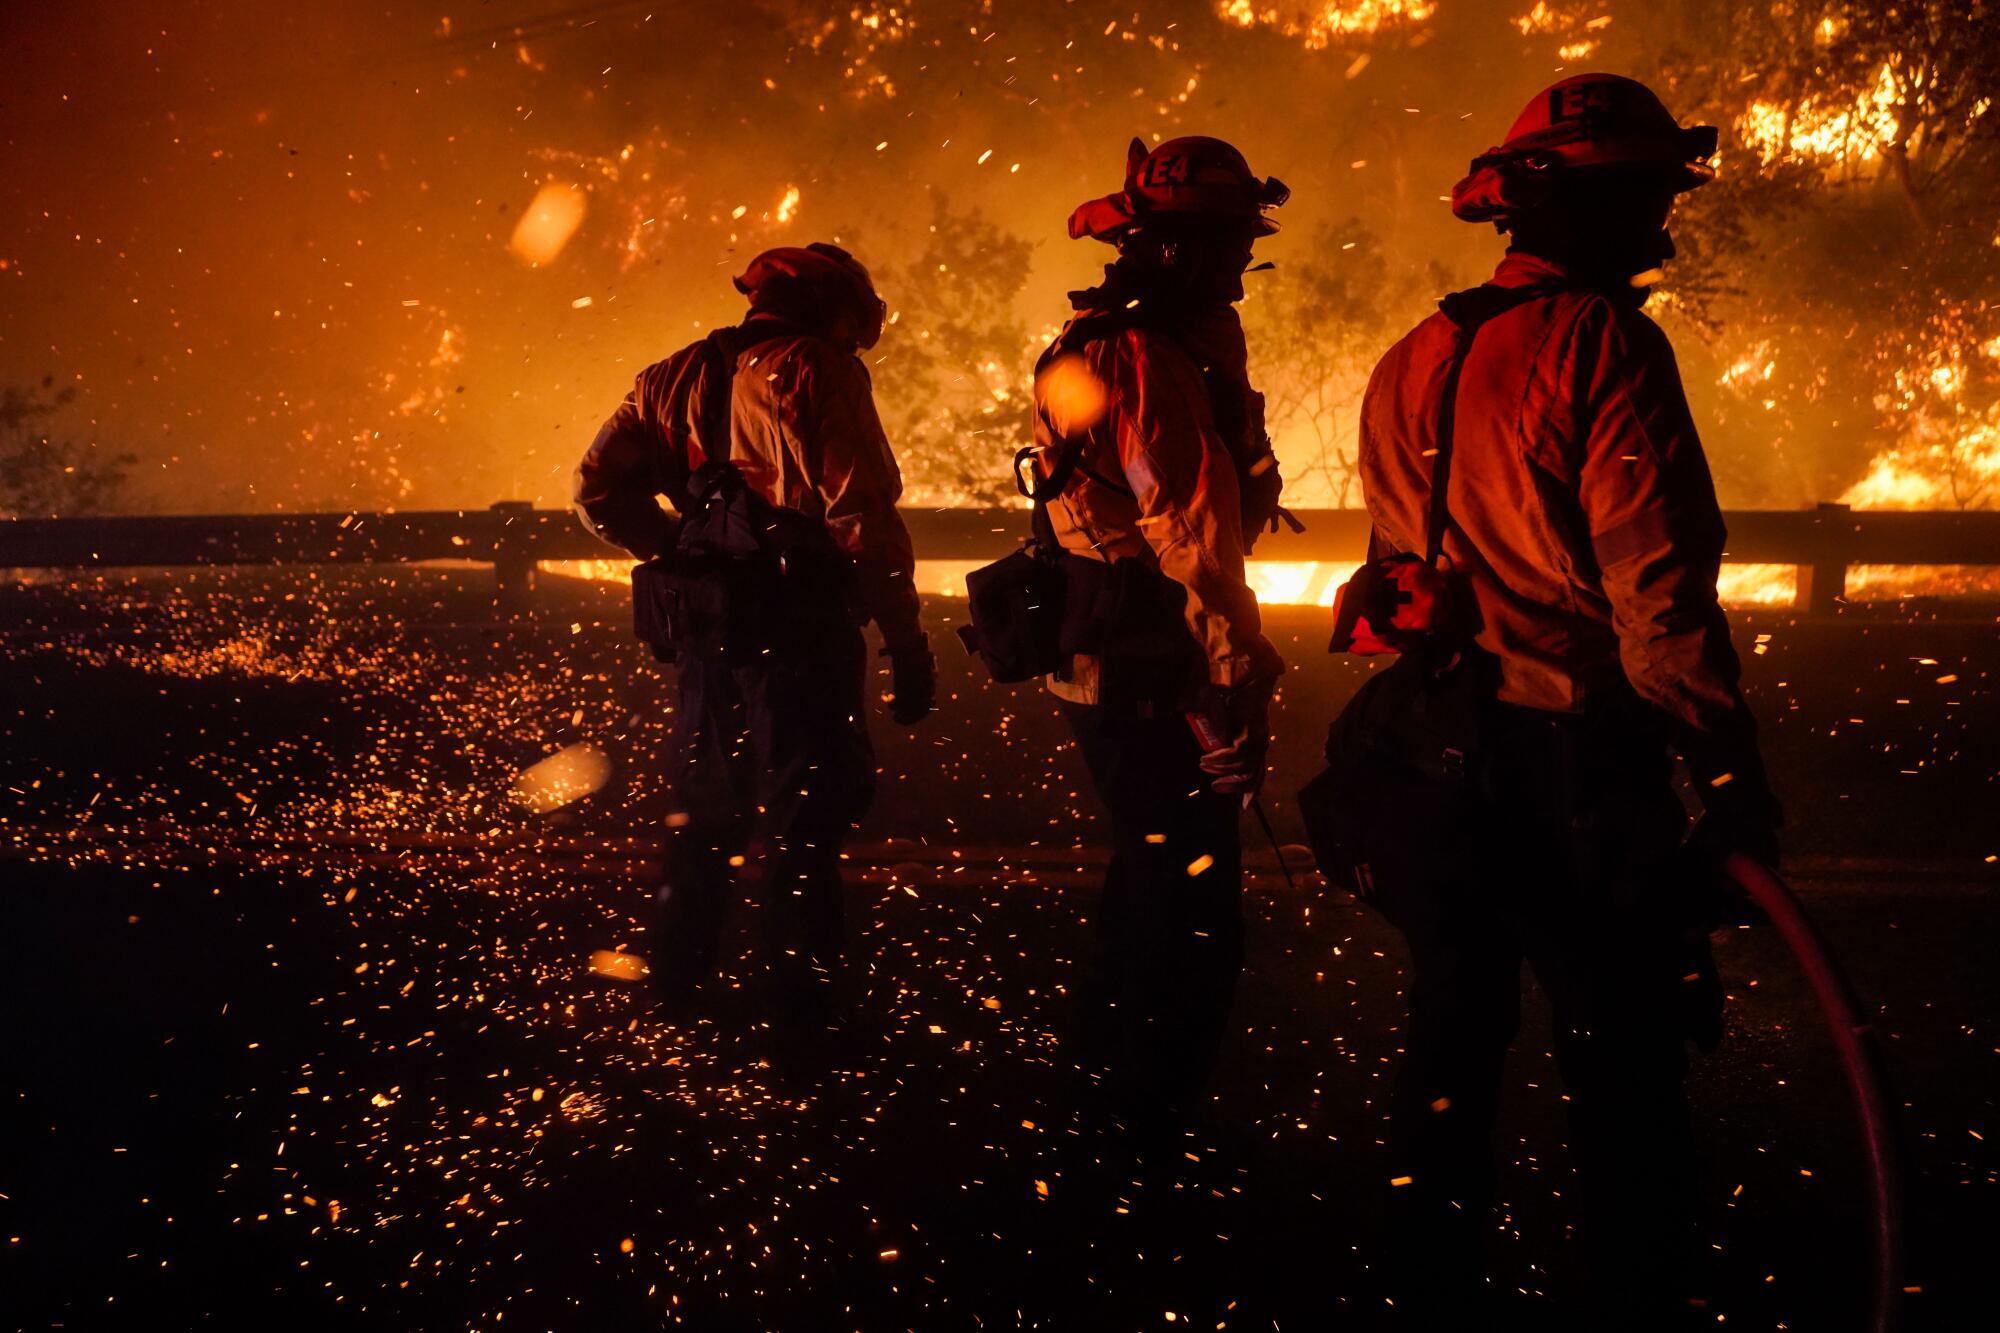 Firefighters silhouetted by orange flames at night with embers floating